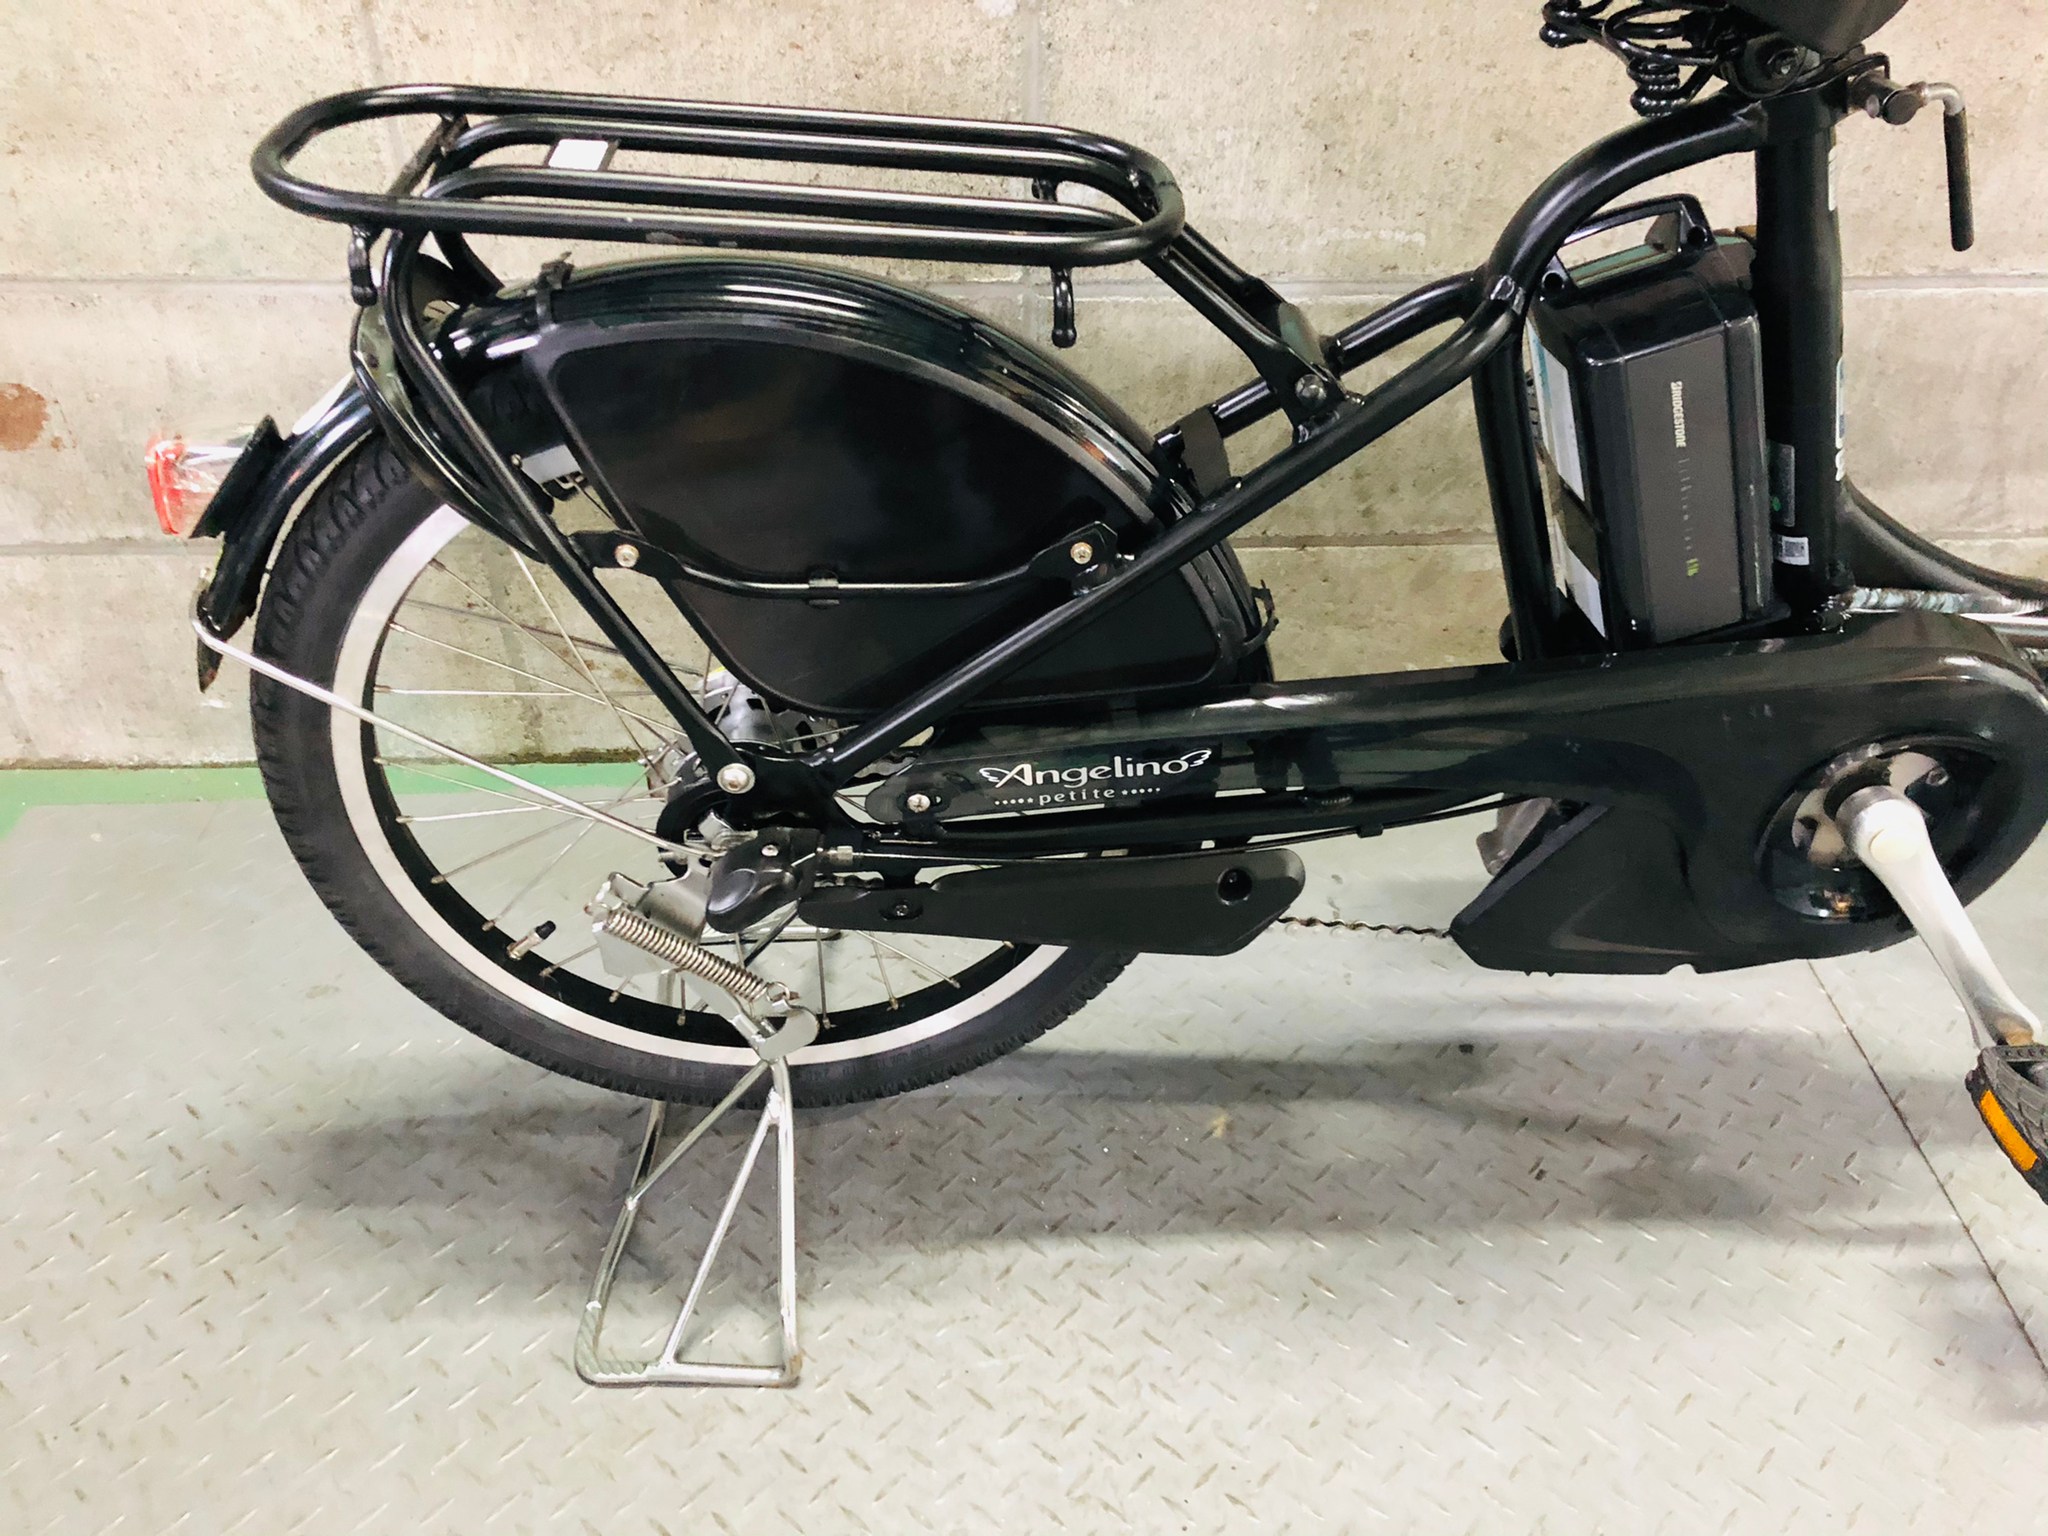 SOLD OUT】電動自転車 ブリヂストン アンジェリーノ 20インチ 子供乗せ